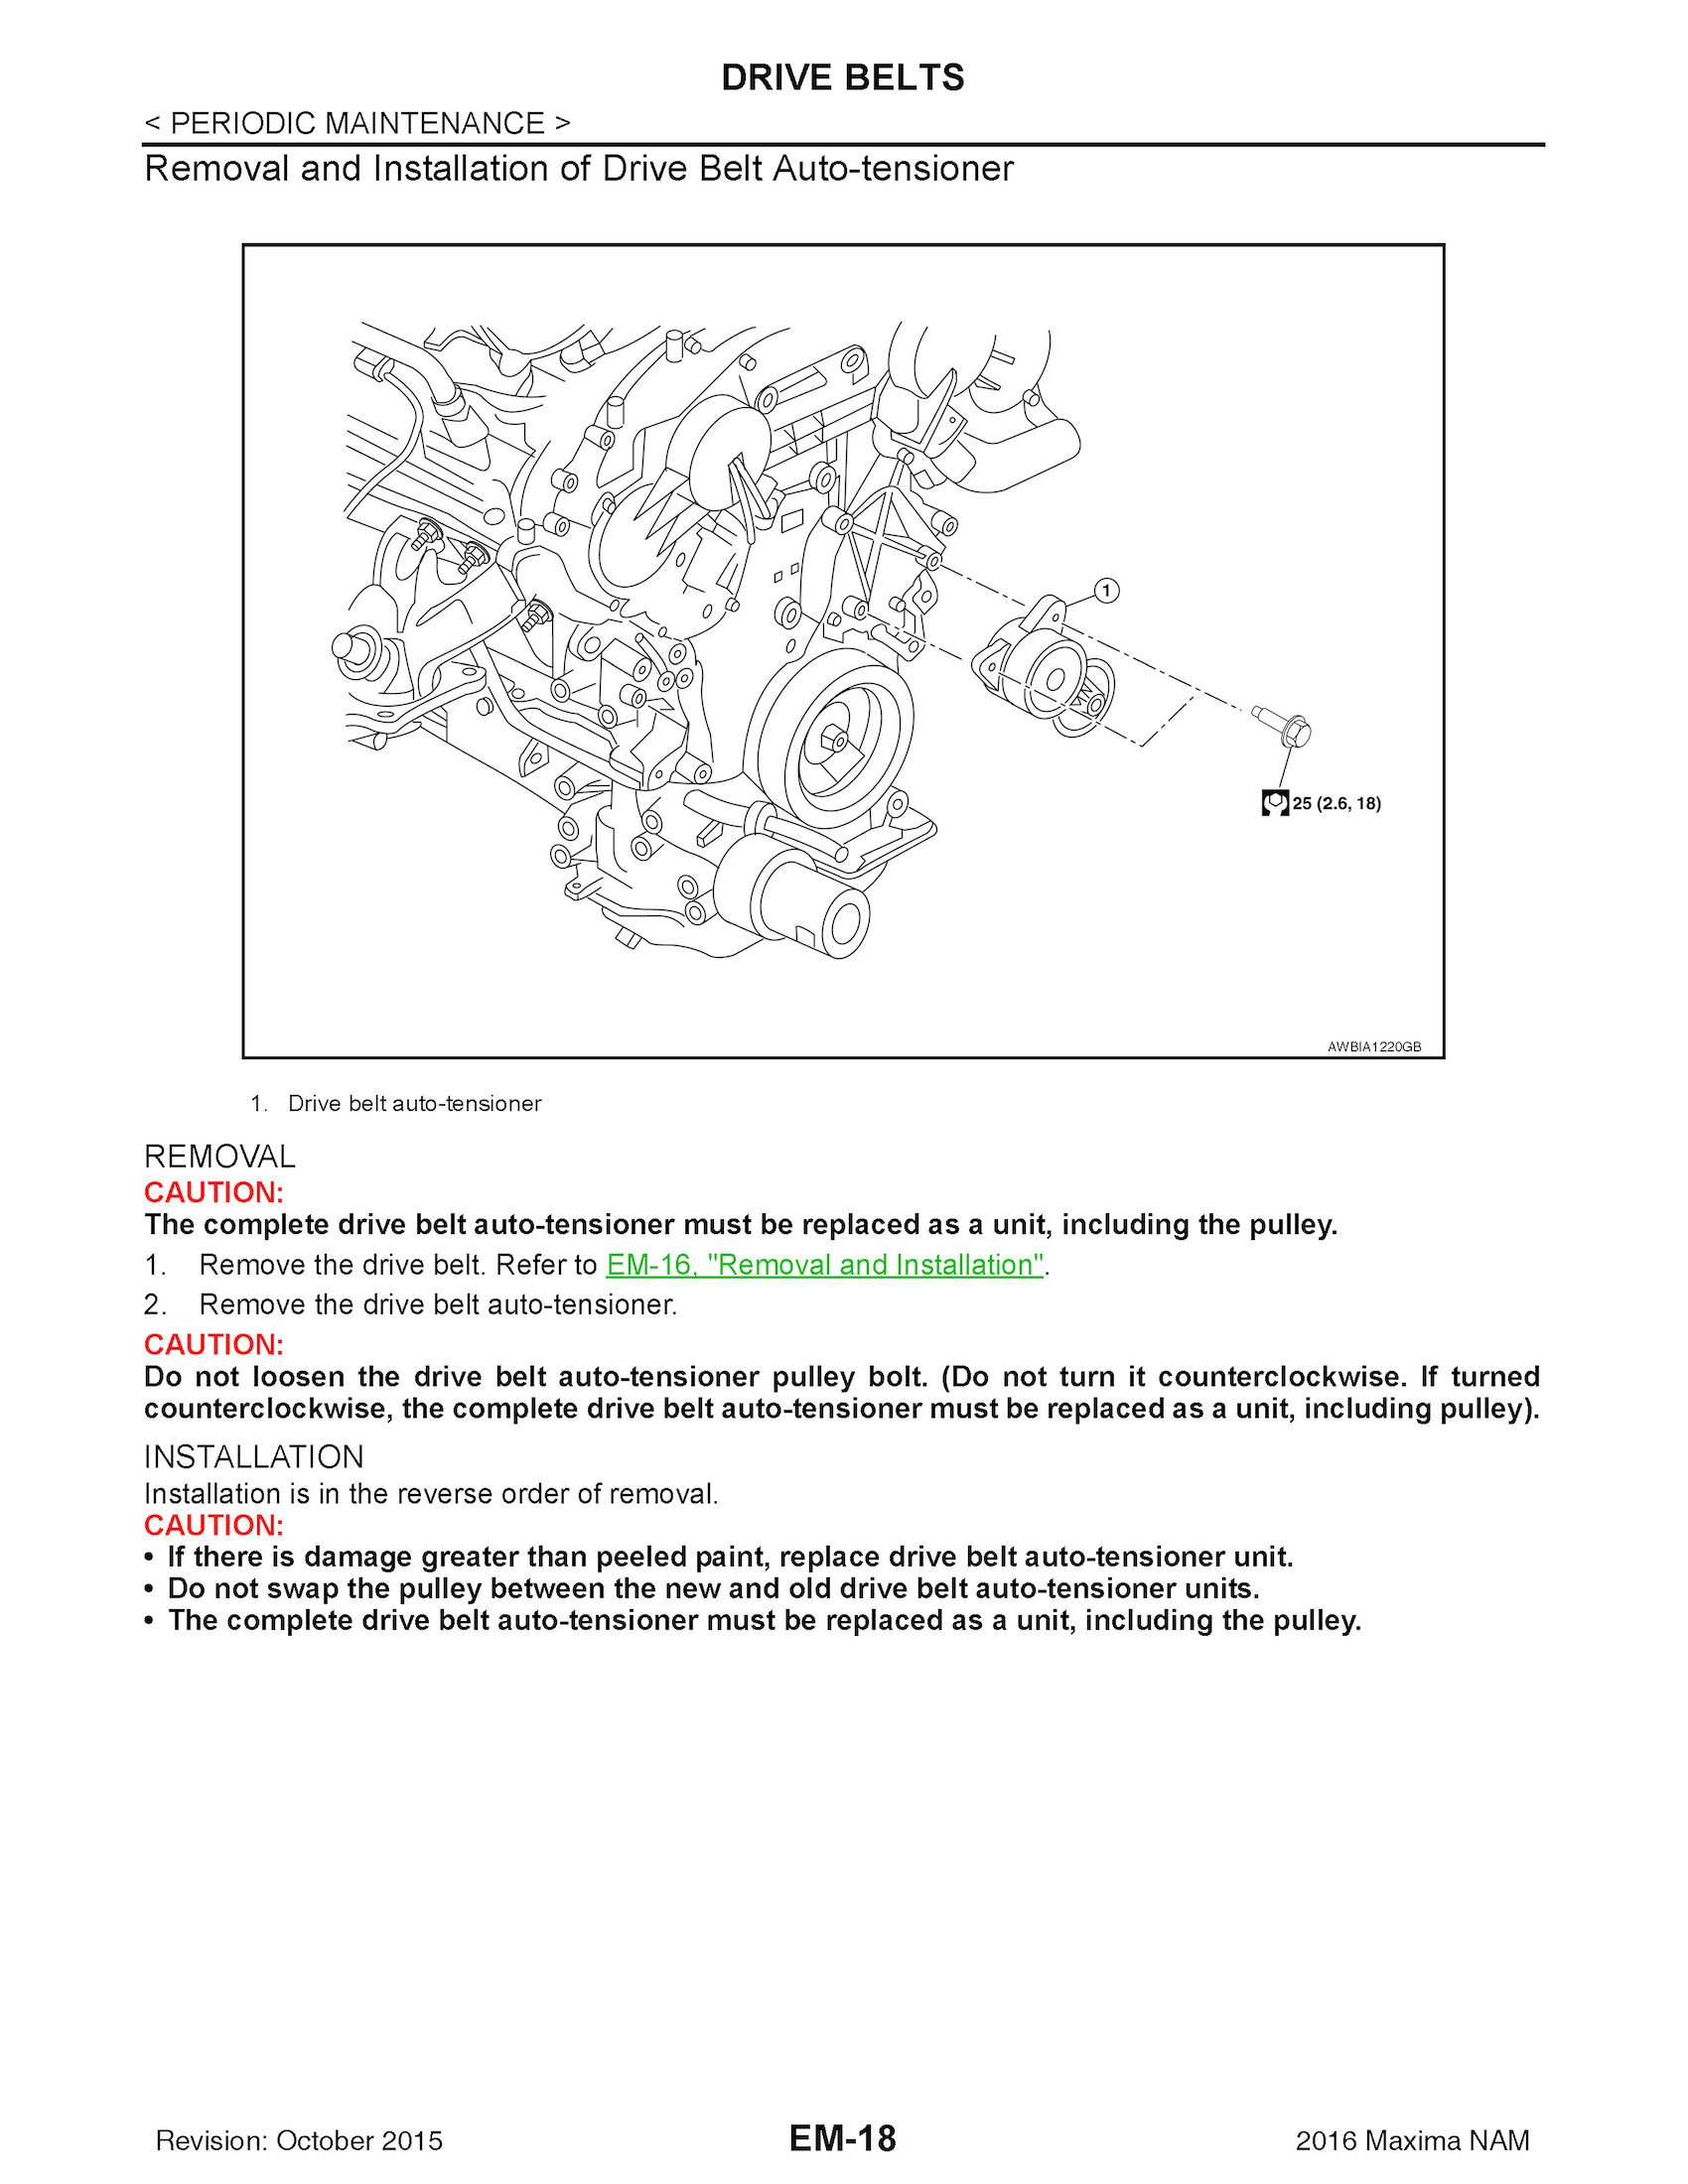 2016 Nissan Maxima Repair Manual, Removal and Installation of Drive Belt Auto-tensioner